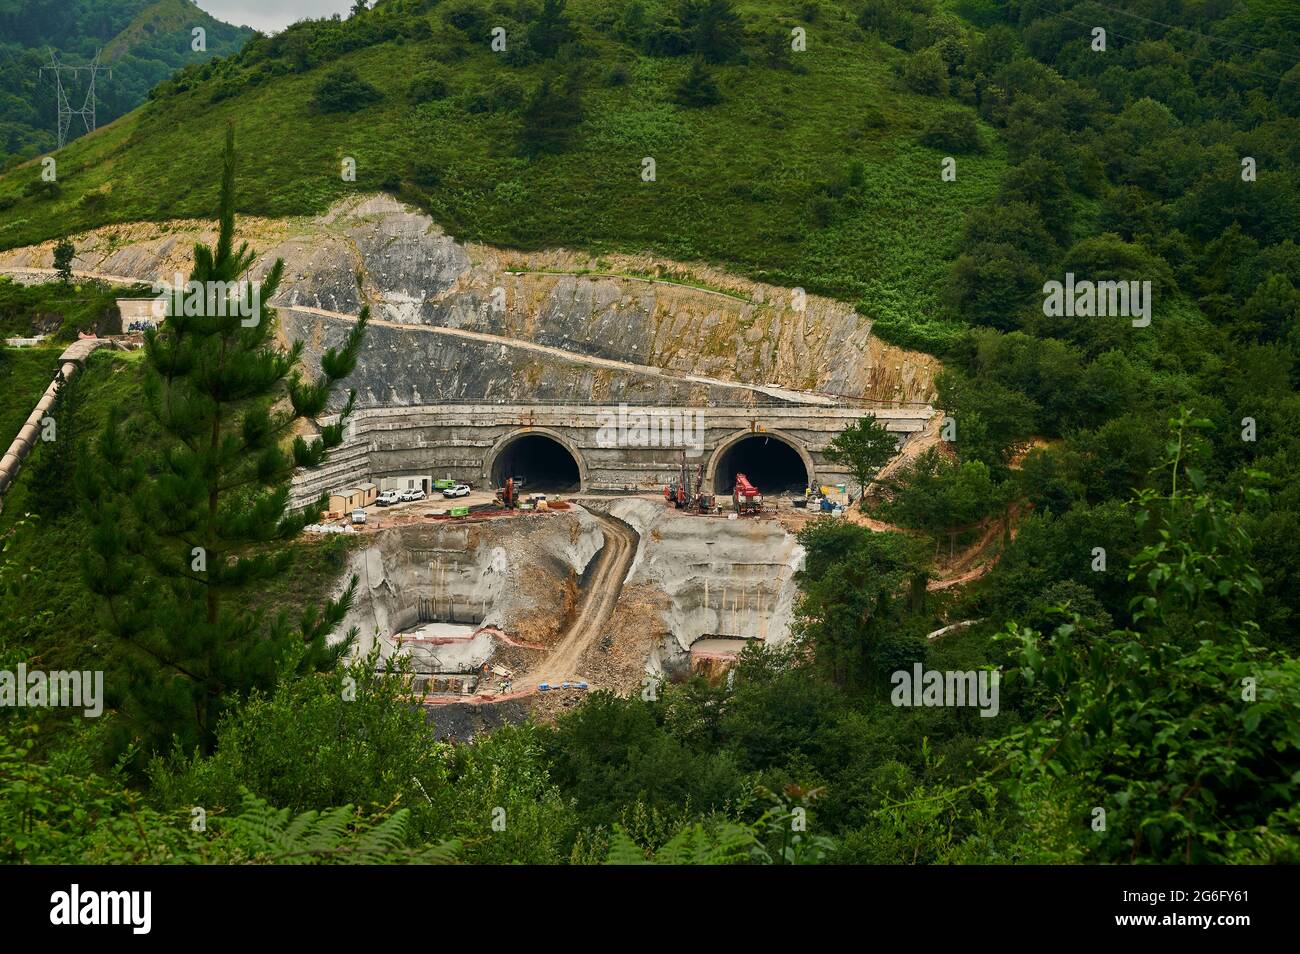 Opening work for the new Seberetxe tunnels, Seberetxe, Buia, Bilbao, Biscay, Basque Country, Spain, Europe Stock Photo